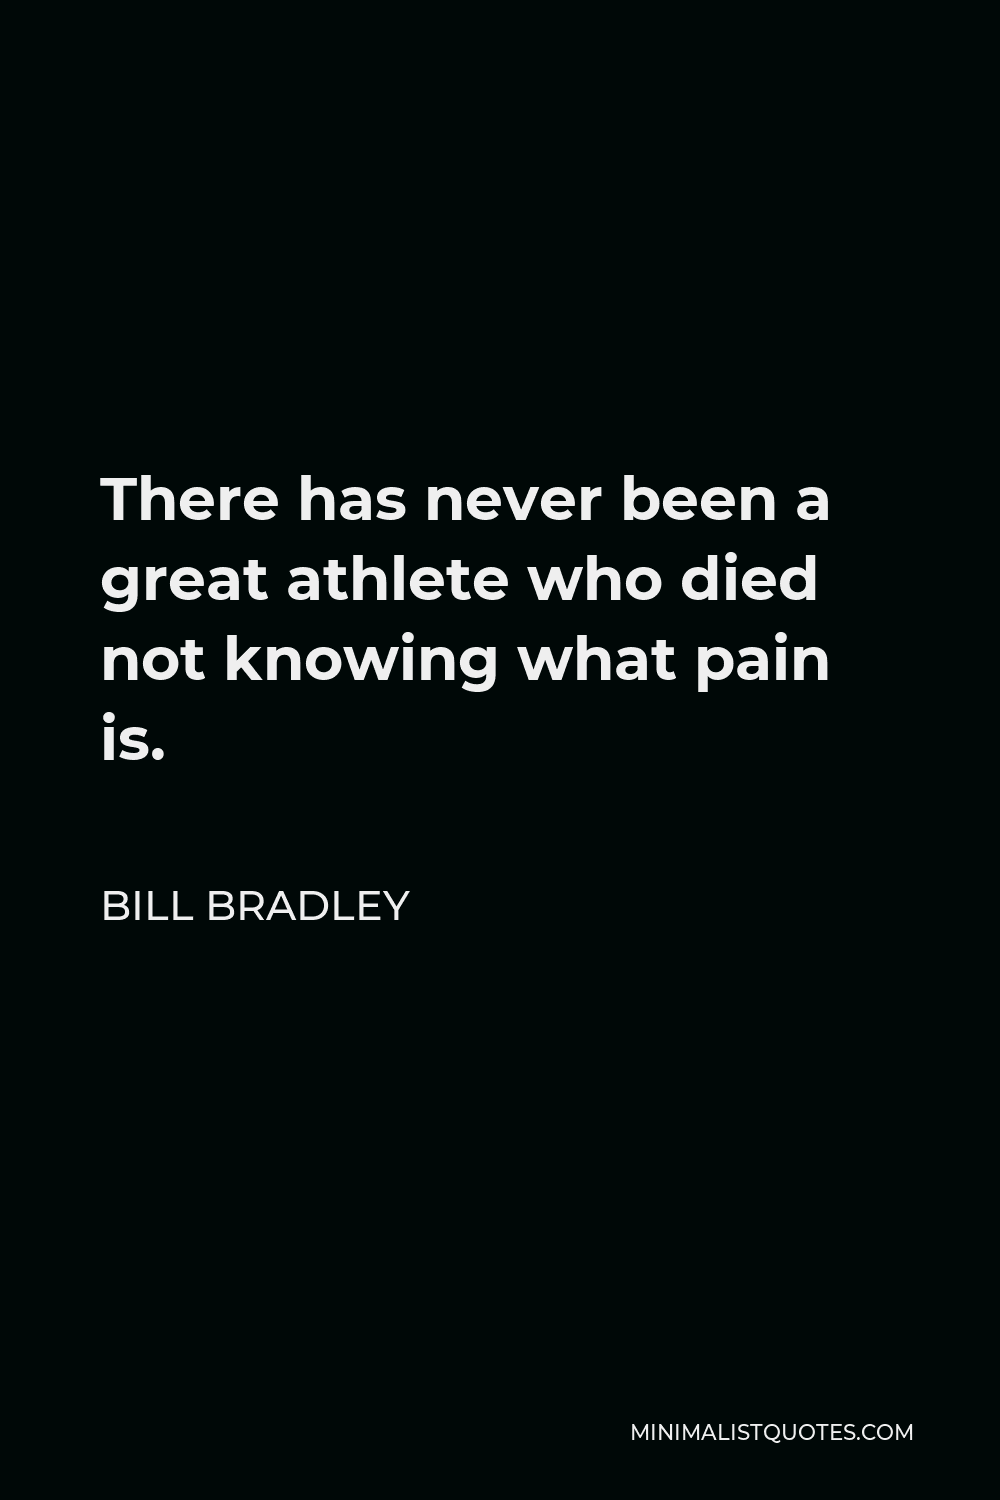 Bill Bradley Quote - There has never been a great athlete who died not knowing what pain is.